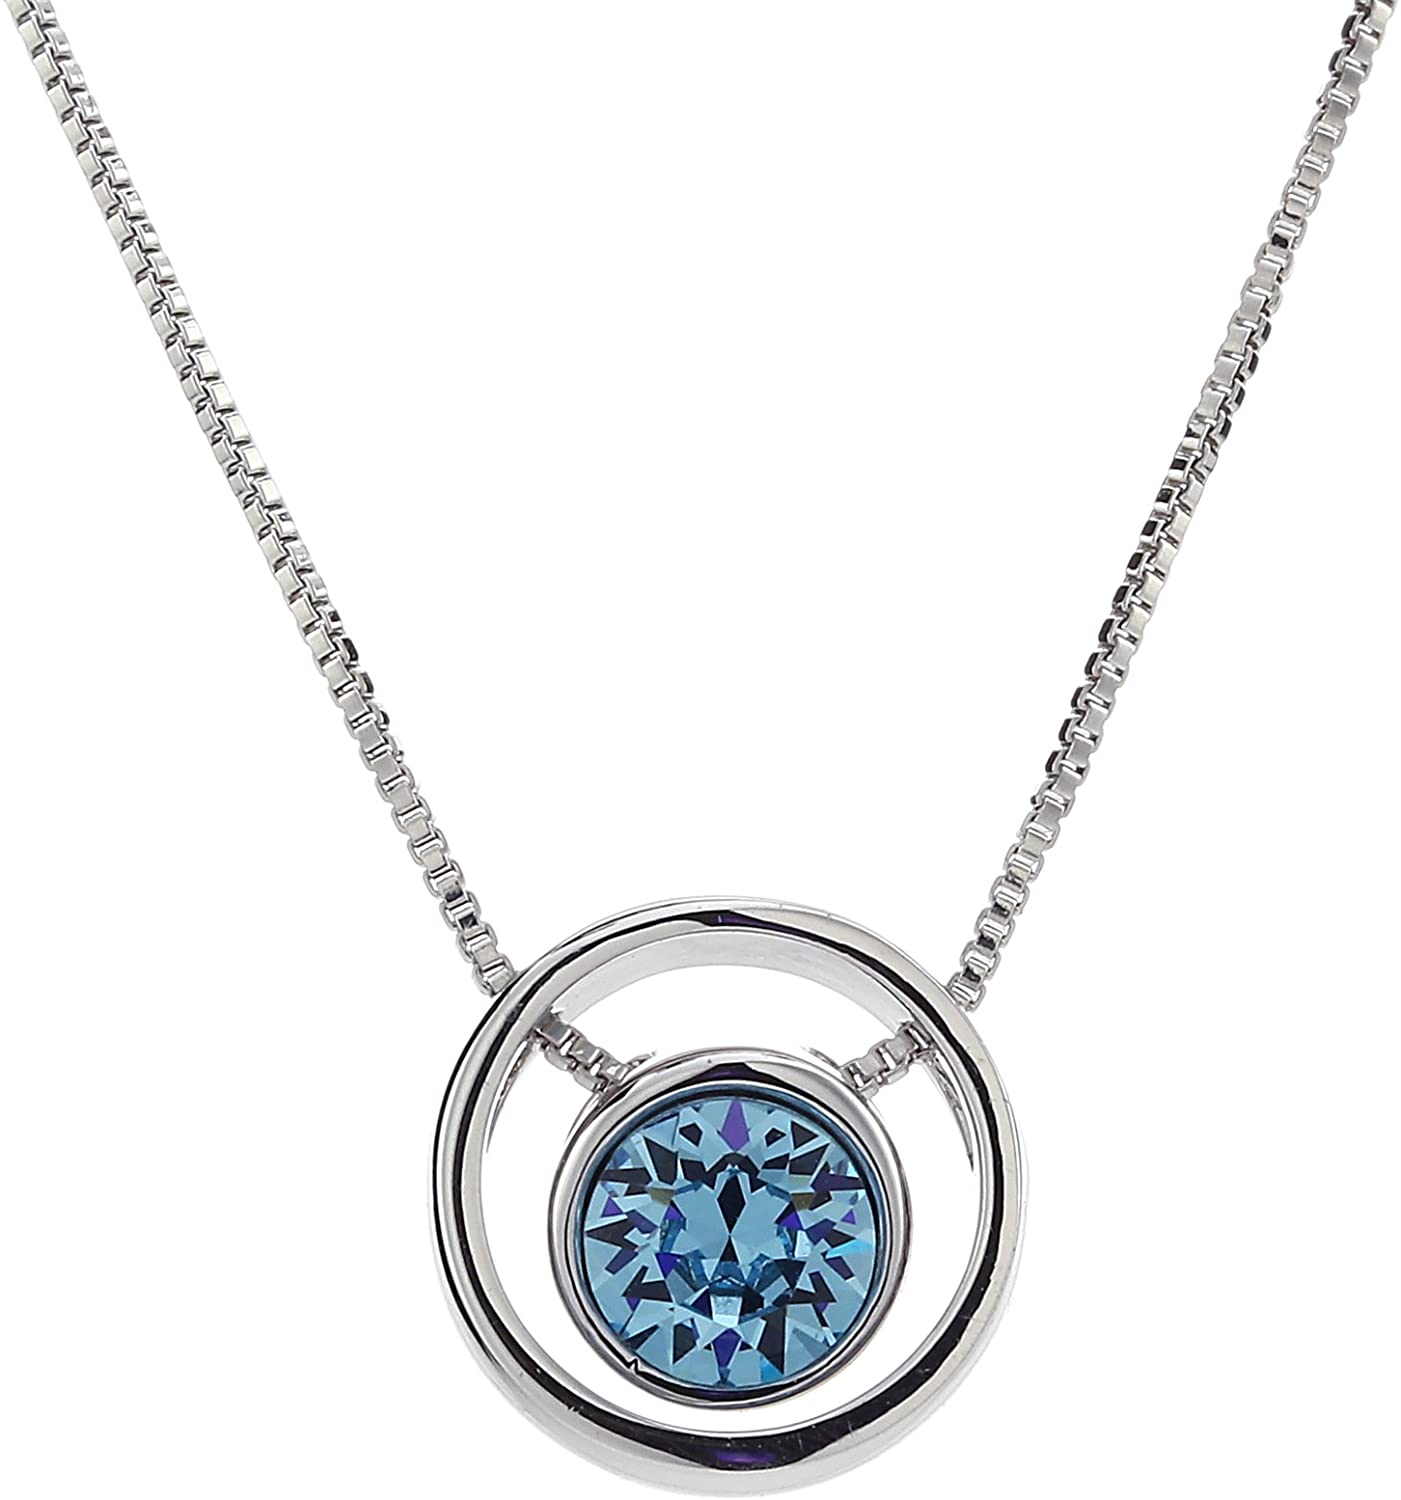 Kruckel; 5061070 Feel-So-Cool You are Always on My Mind White Gold Plated Necklace;